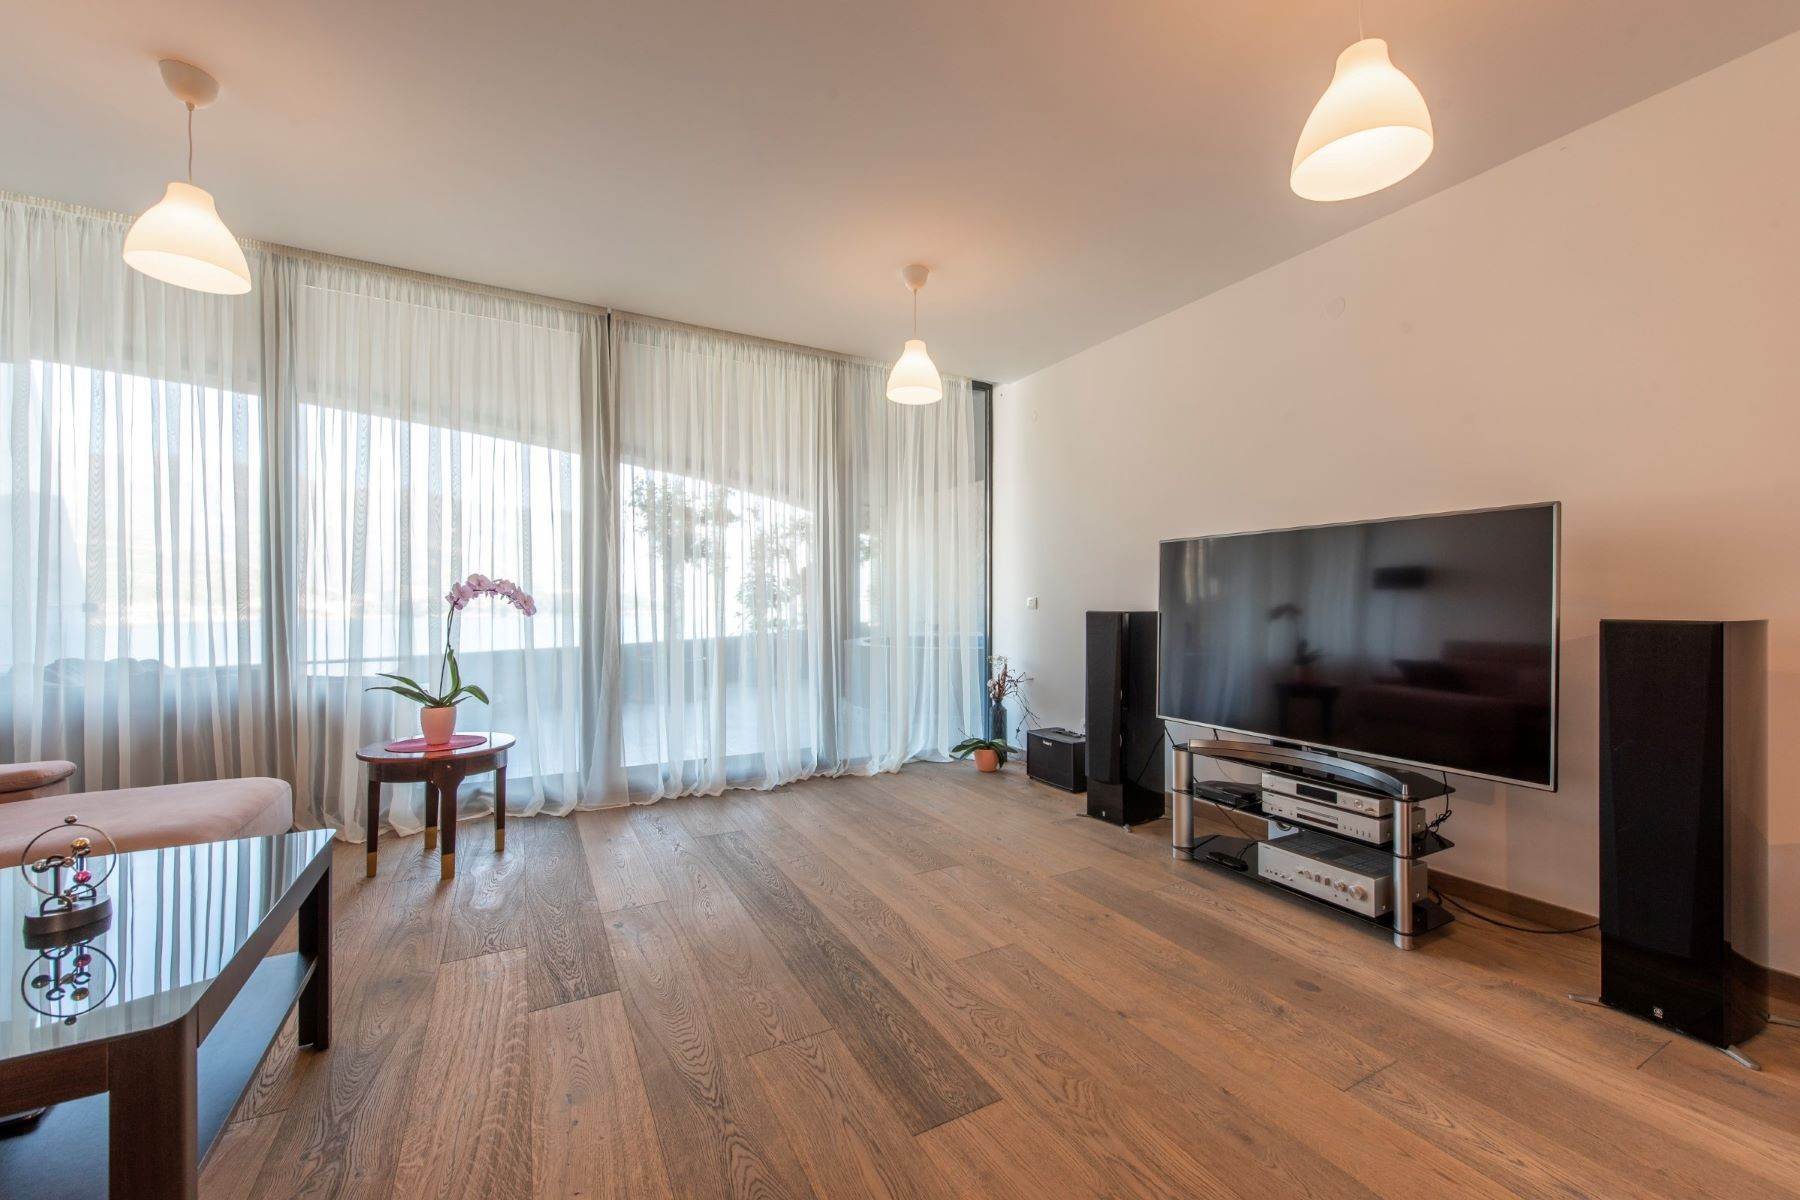 4. Apartments for Sale at Royal Gardens 3bdr Apartment Royal Gardens Budva, Budva 85330 Montenegro